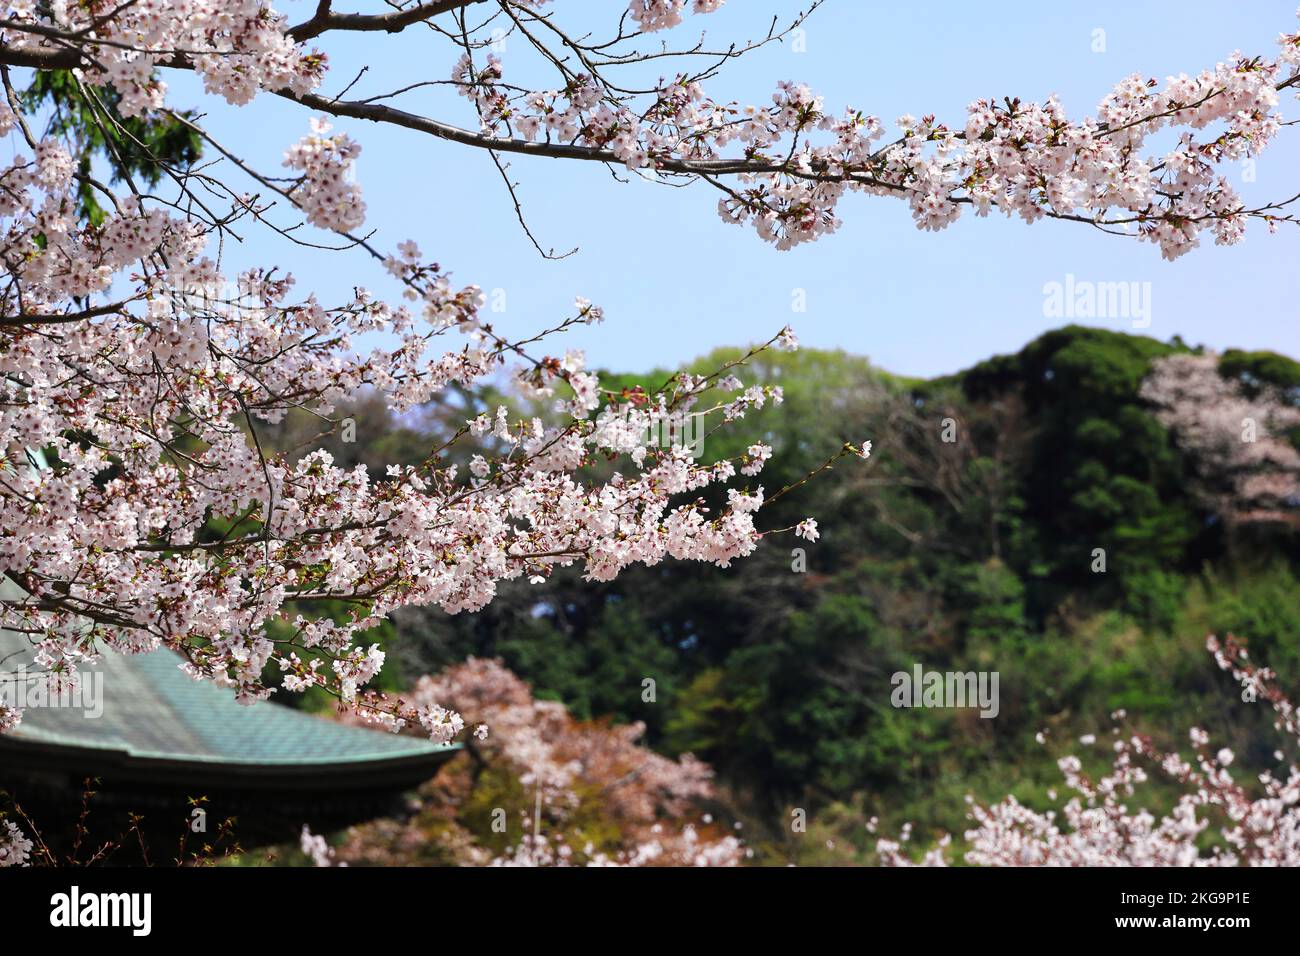 Scenery of Kamakura, Japan Cherry blossoms, Kamakura's small mountains and the eaves of a temple Stock Photo